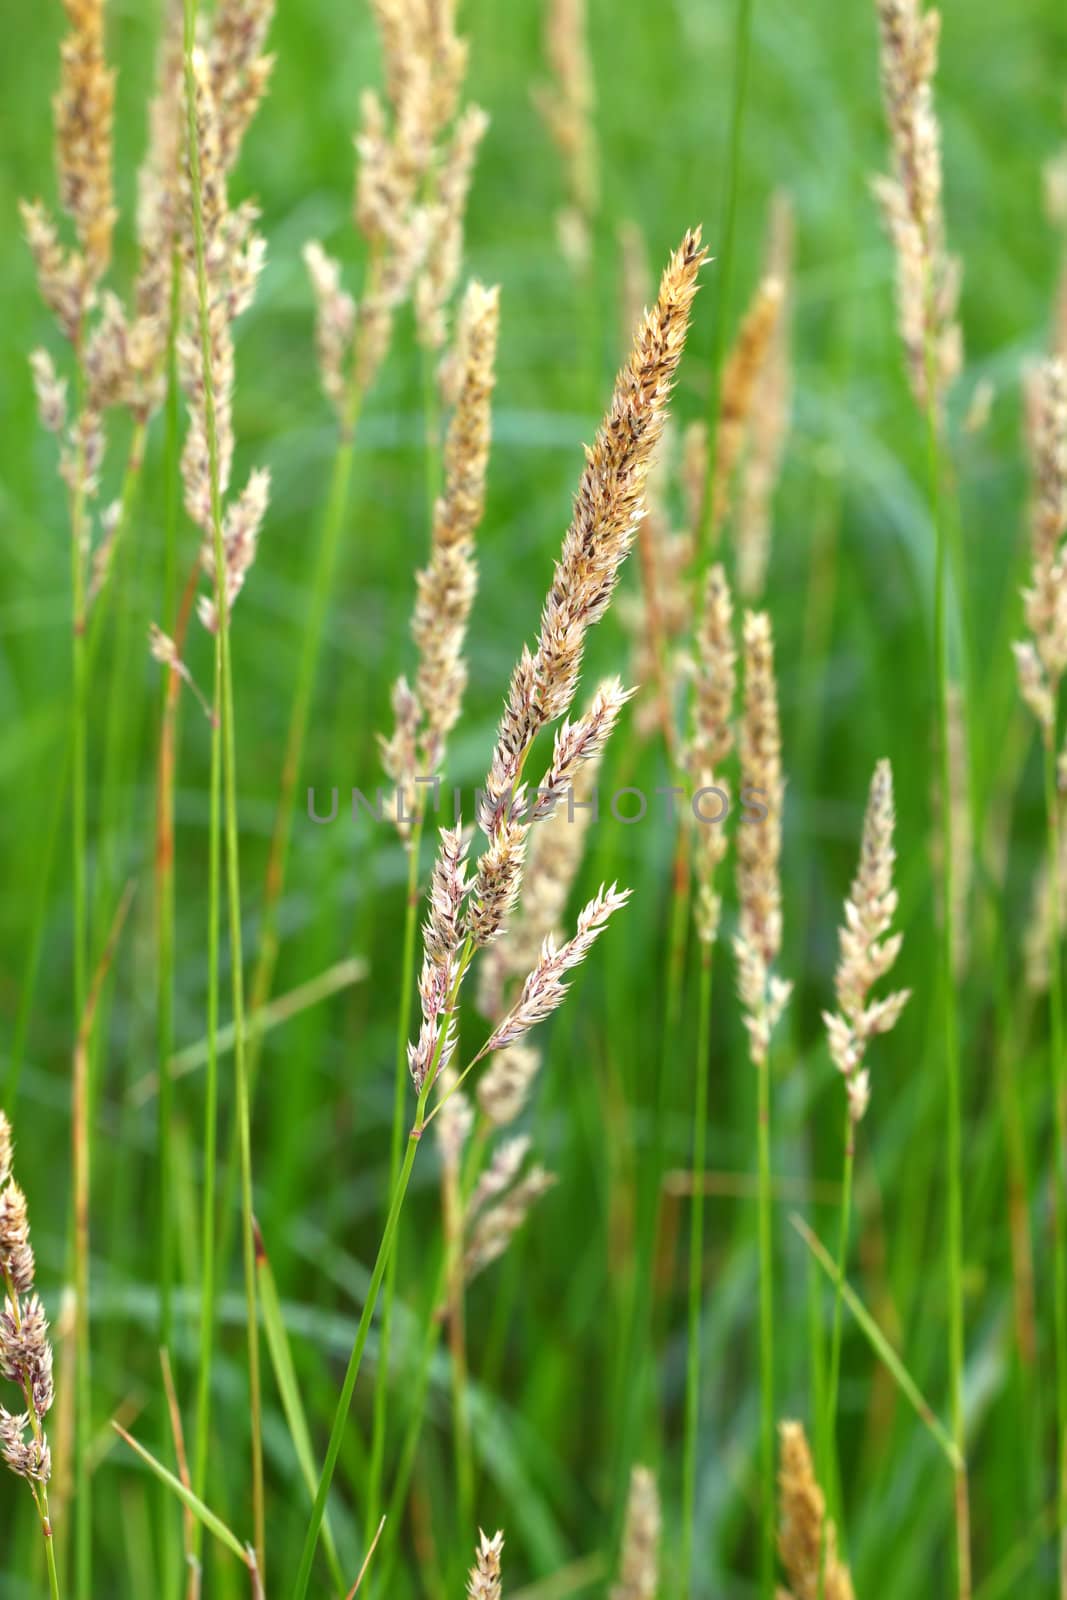 Reed Canary Grass (Phalaris arundinacea) grows thickly in a field of northern Illinois.